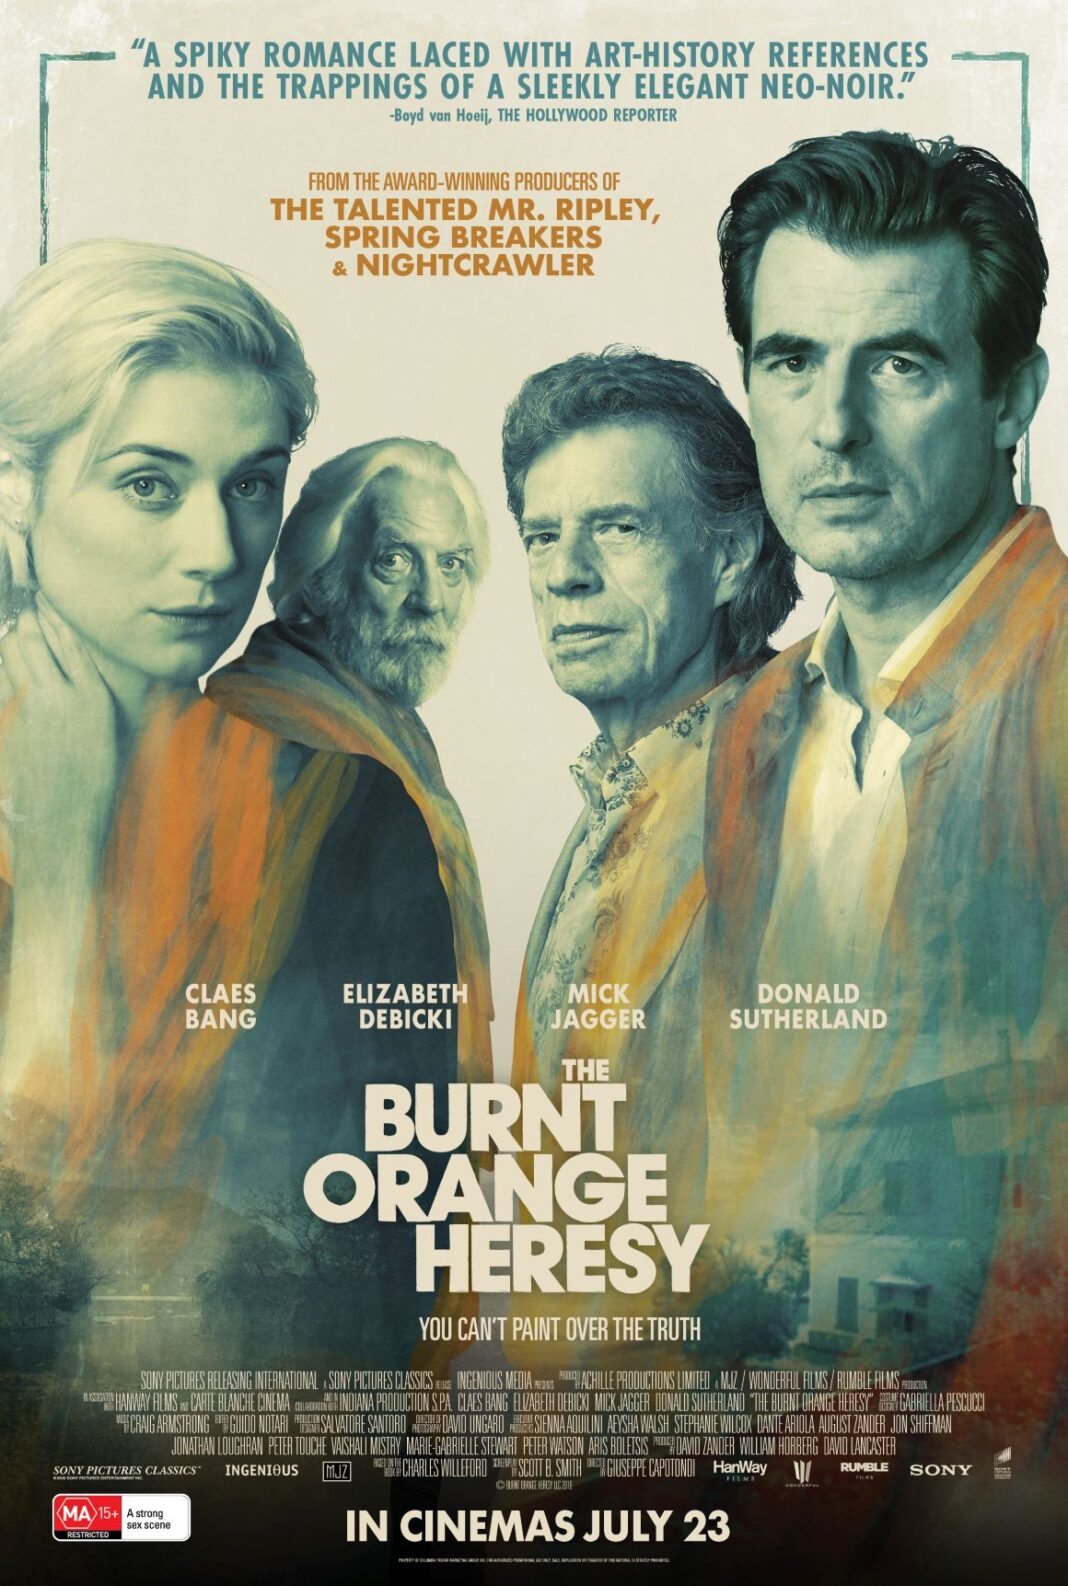 Movie poster in black white and orange featuring four actors for the film, 'The Burnt Orange Heresy (MA15+)